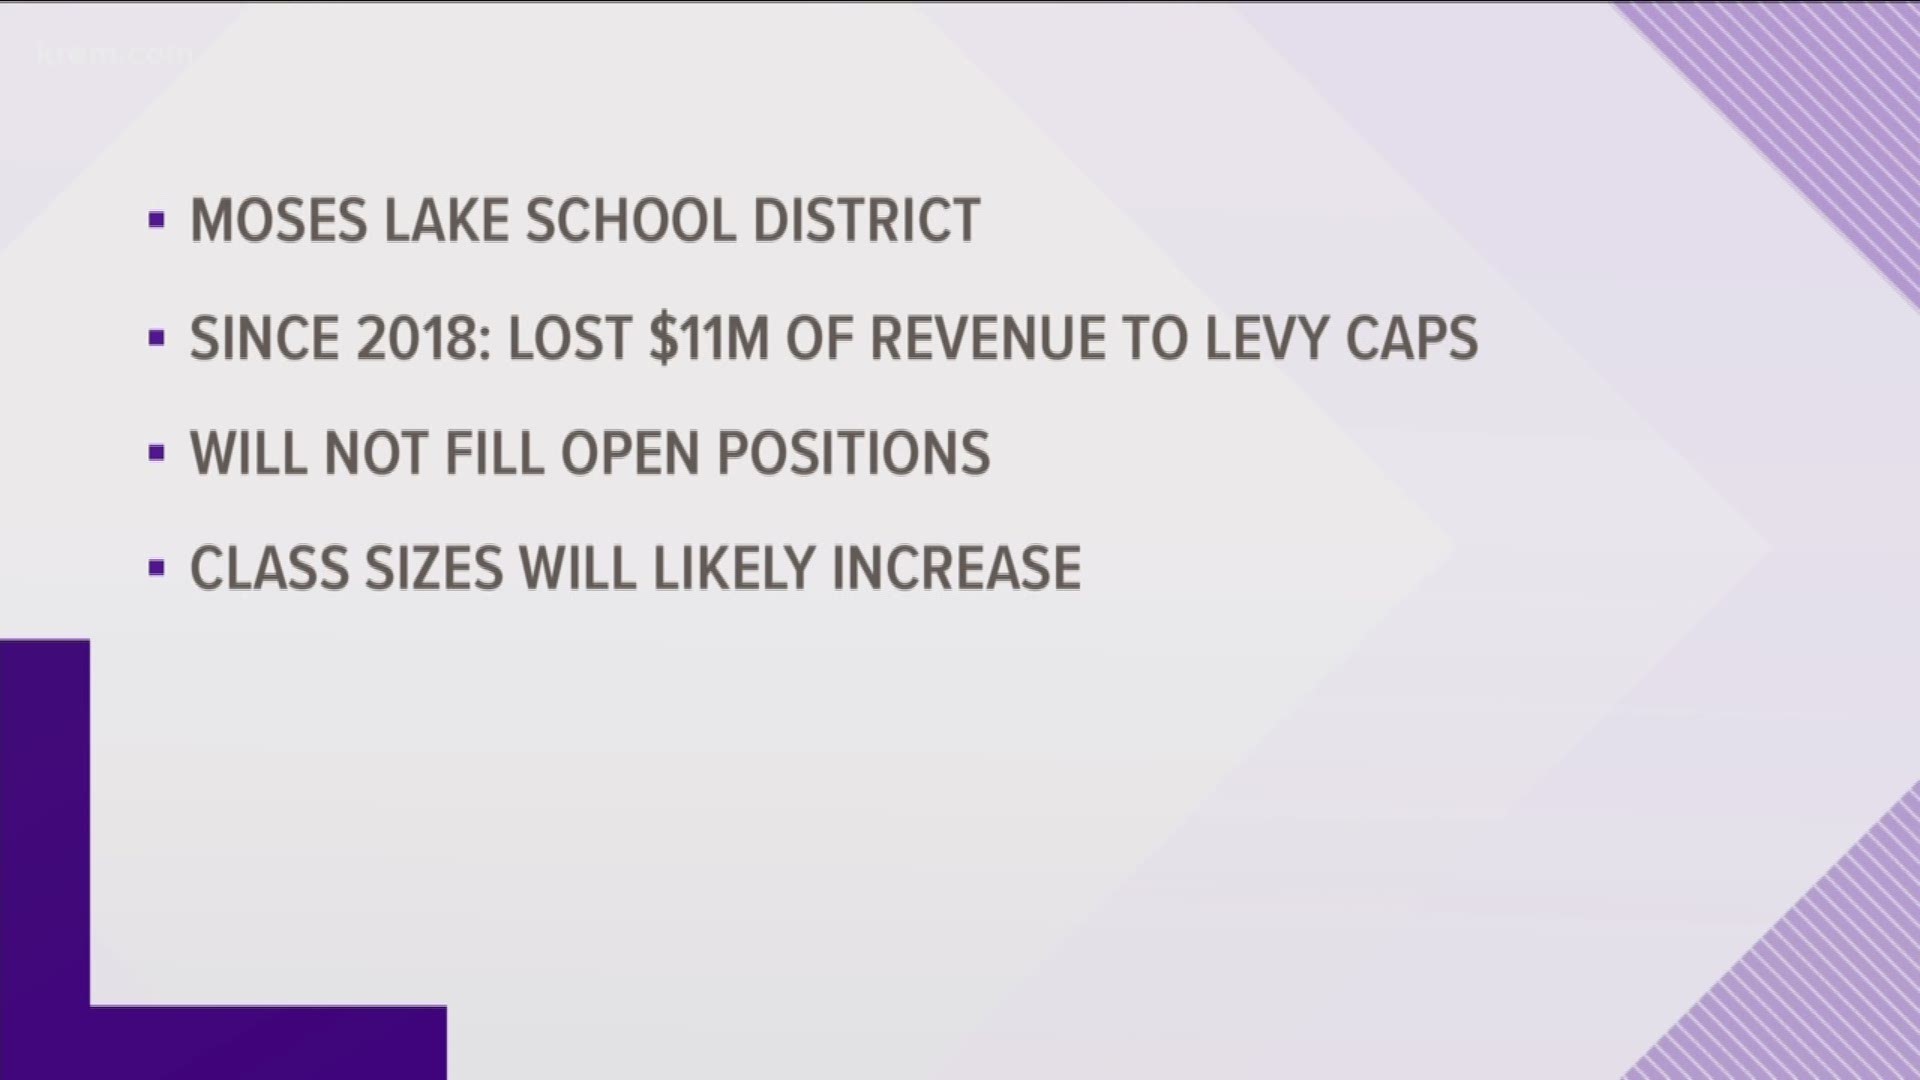 District leaders said recent collective bargaining efforts between the district and local associations have resulted in an increase of human resource costs of over $8.7 million.